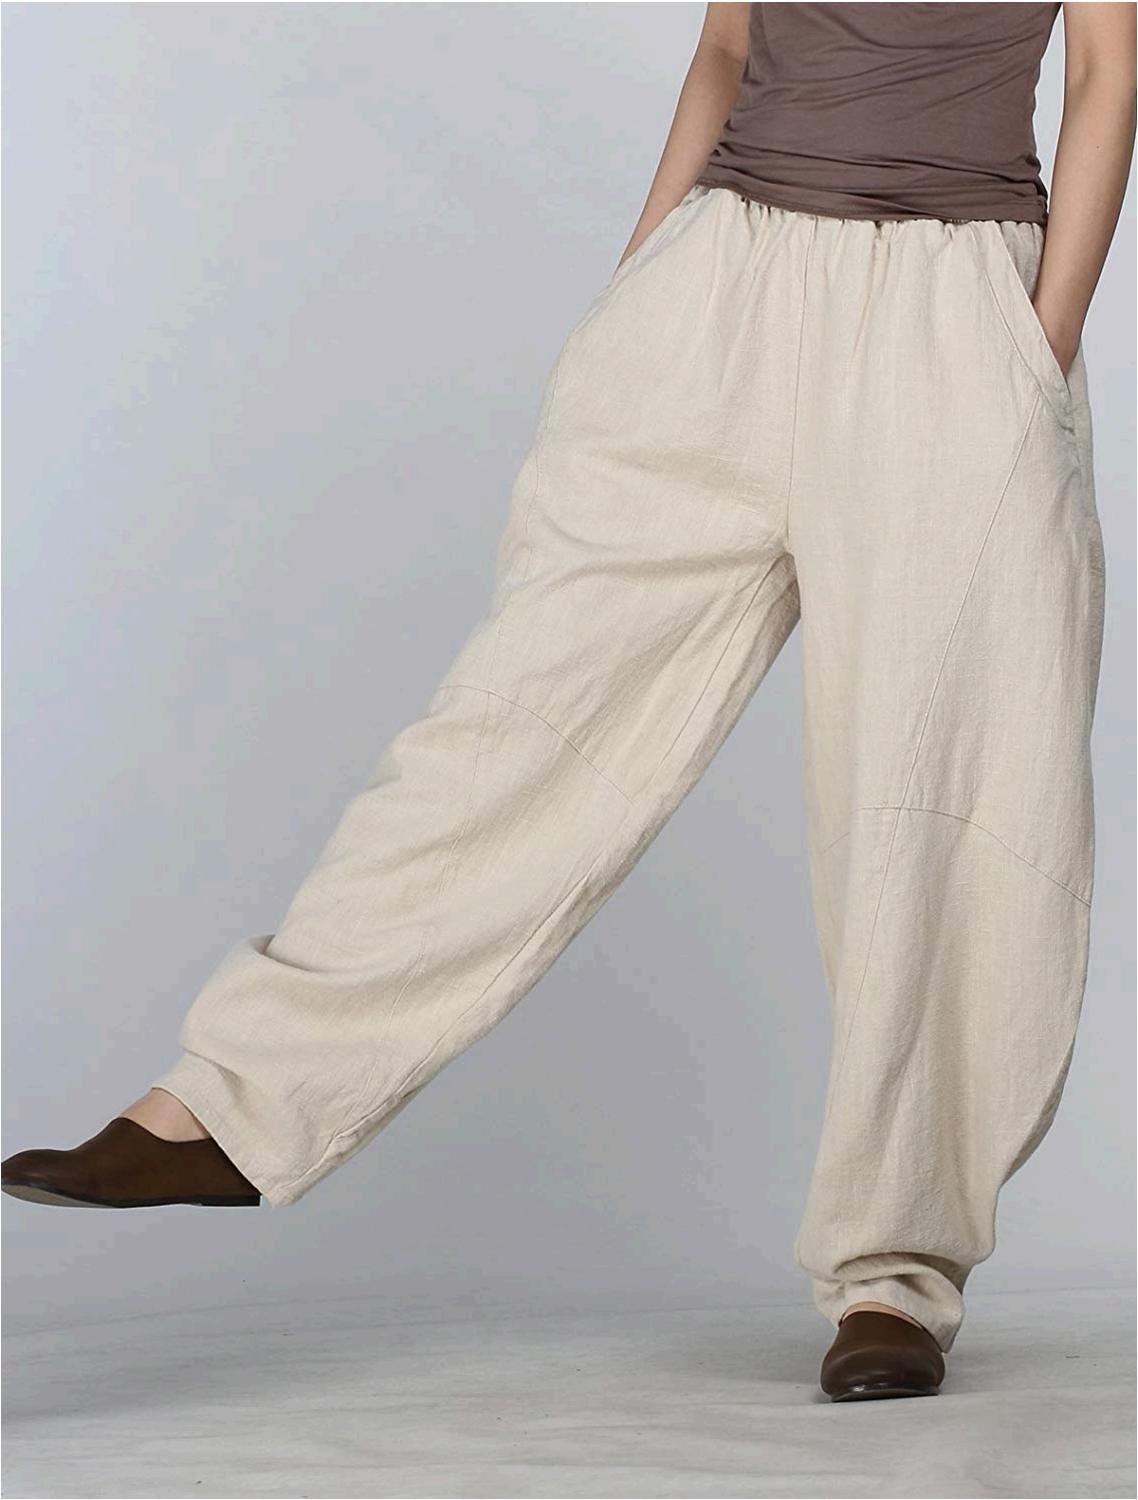 Are you ready for some fabulous ladies pants you'll love?